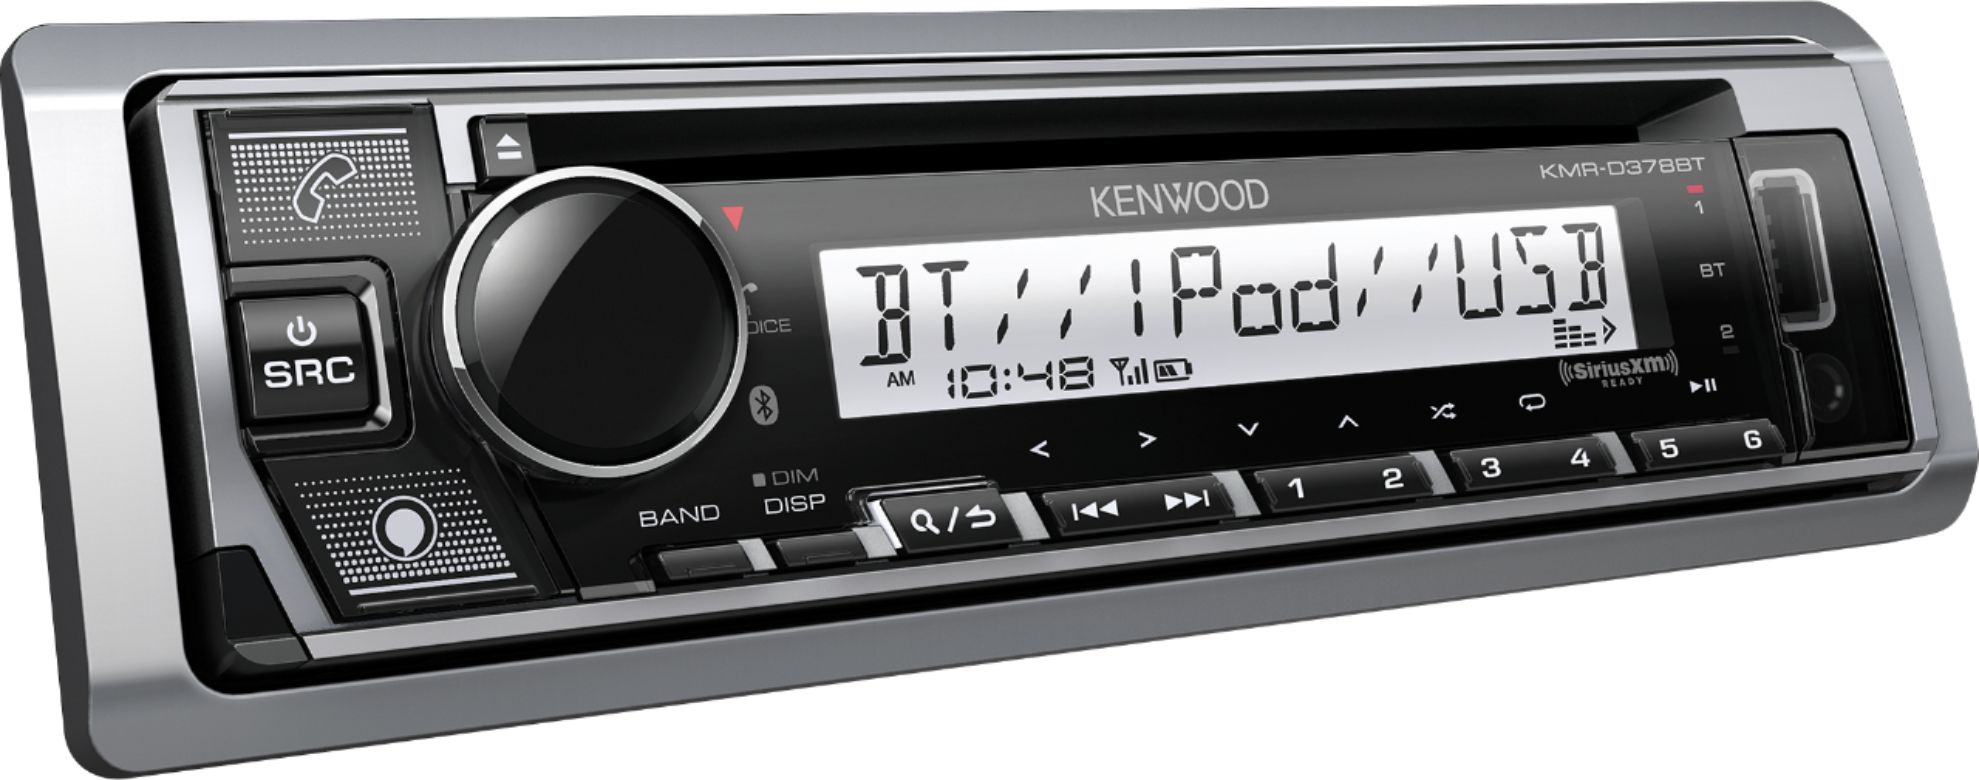 Angle View: Kenwood - In-Dash CD/DM Receiver - Built-in Bluetooth - Satellite Radio-Ready with Detachable Faceplate - Silver